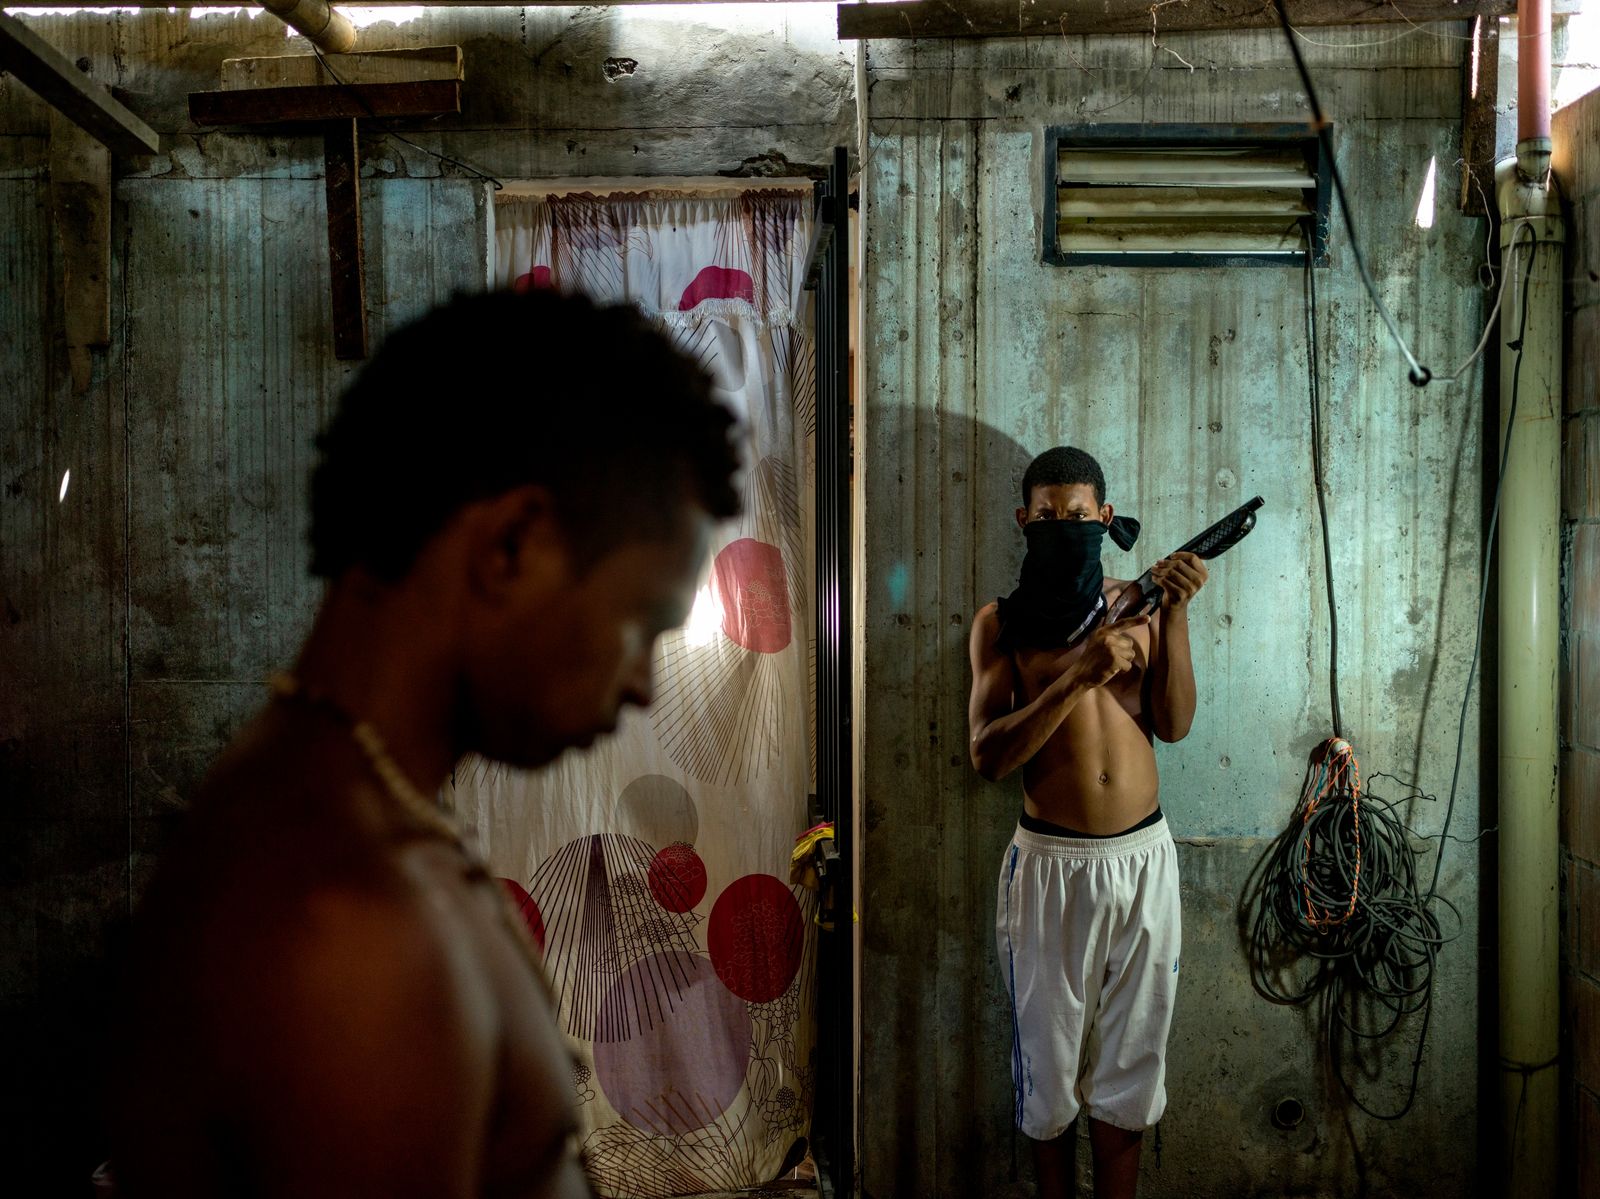 © Mads Nissen - Image from the Sangre Blanca - The Lost War on Cocaine photography project